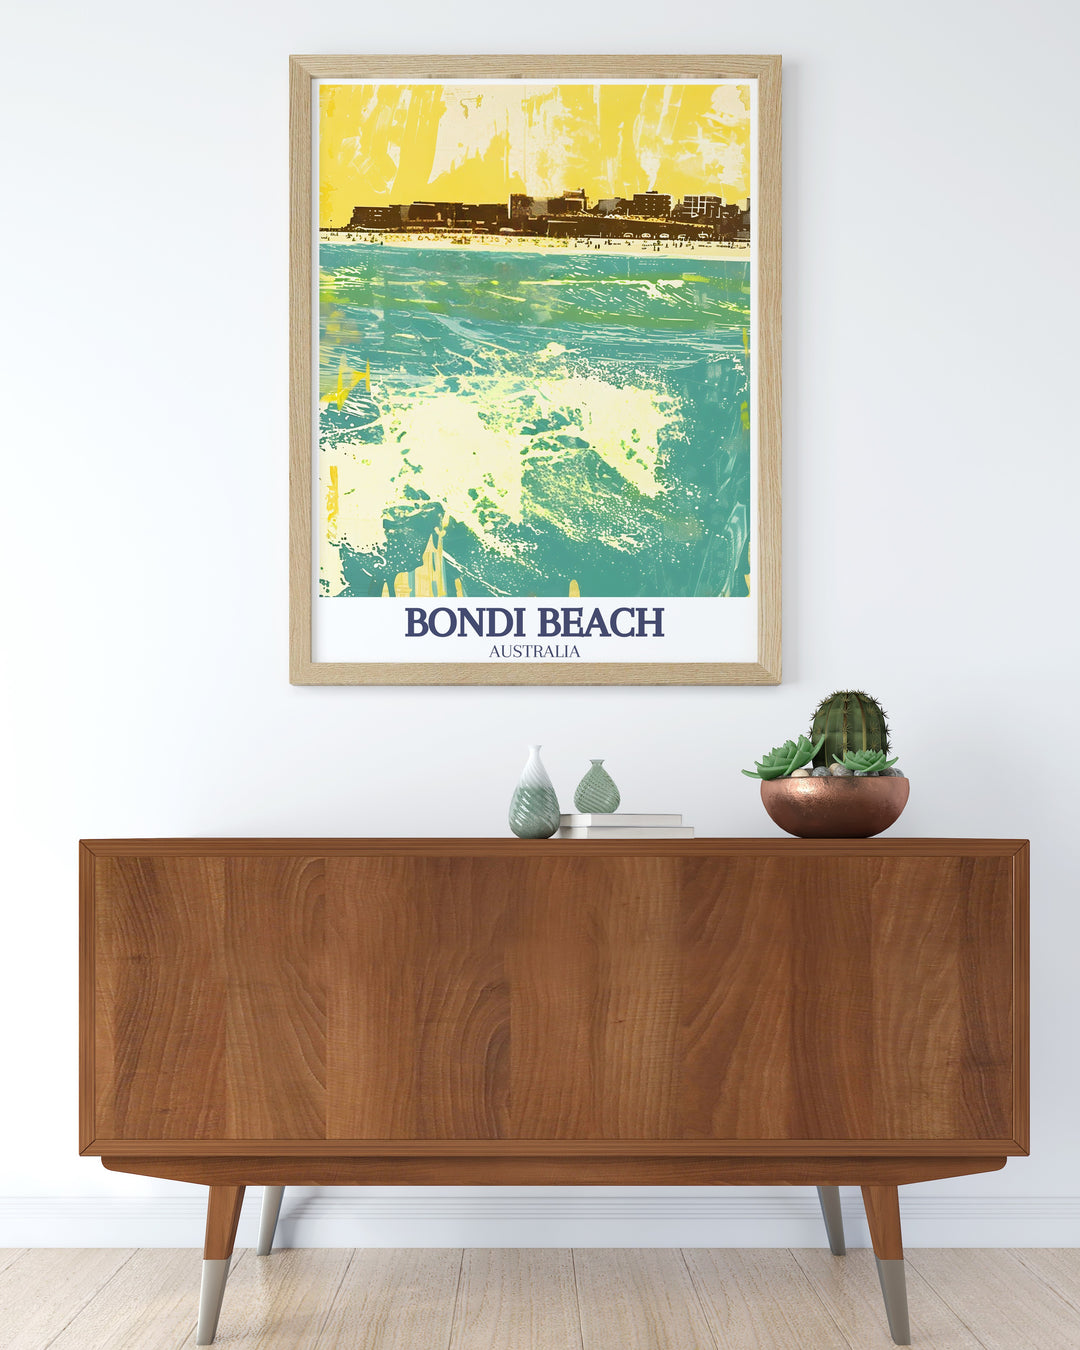 Vintage travel print of Sydney Harbour with the Sydney Opera House and Harbour Bridge. Bondi, South Bondi Beach gifts provide a beautiful and lively representation of the beach, ideal for art enthusiasts and travelers.